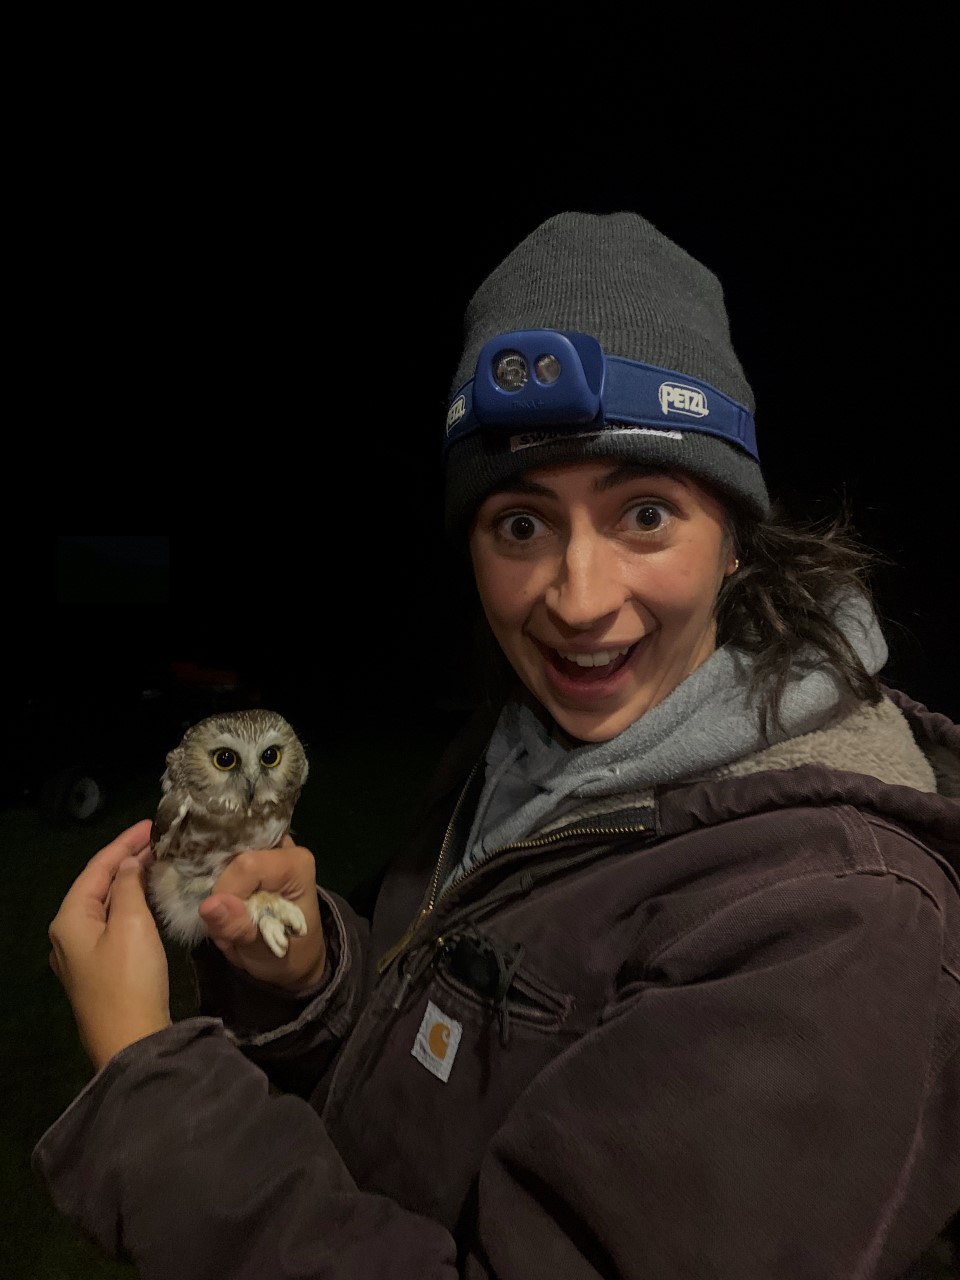 Mia Fox looks exhuberantly to the camera. On her head she is wearing a blue gray cap and headlamp and in her hands she holds a small owl, who is also looking to the camera.